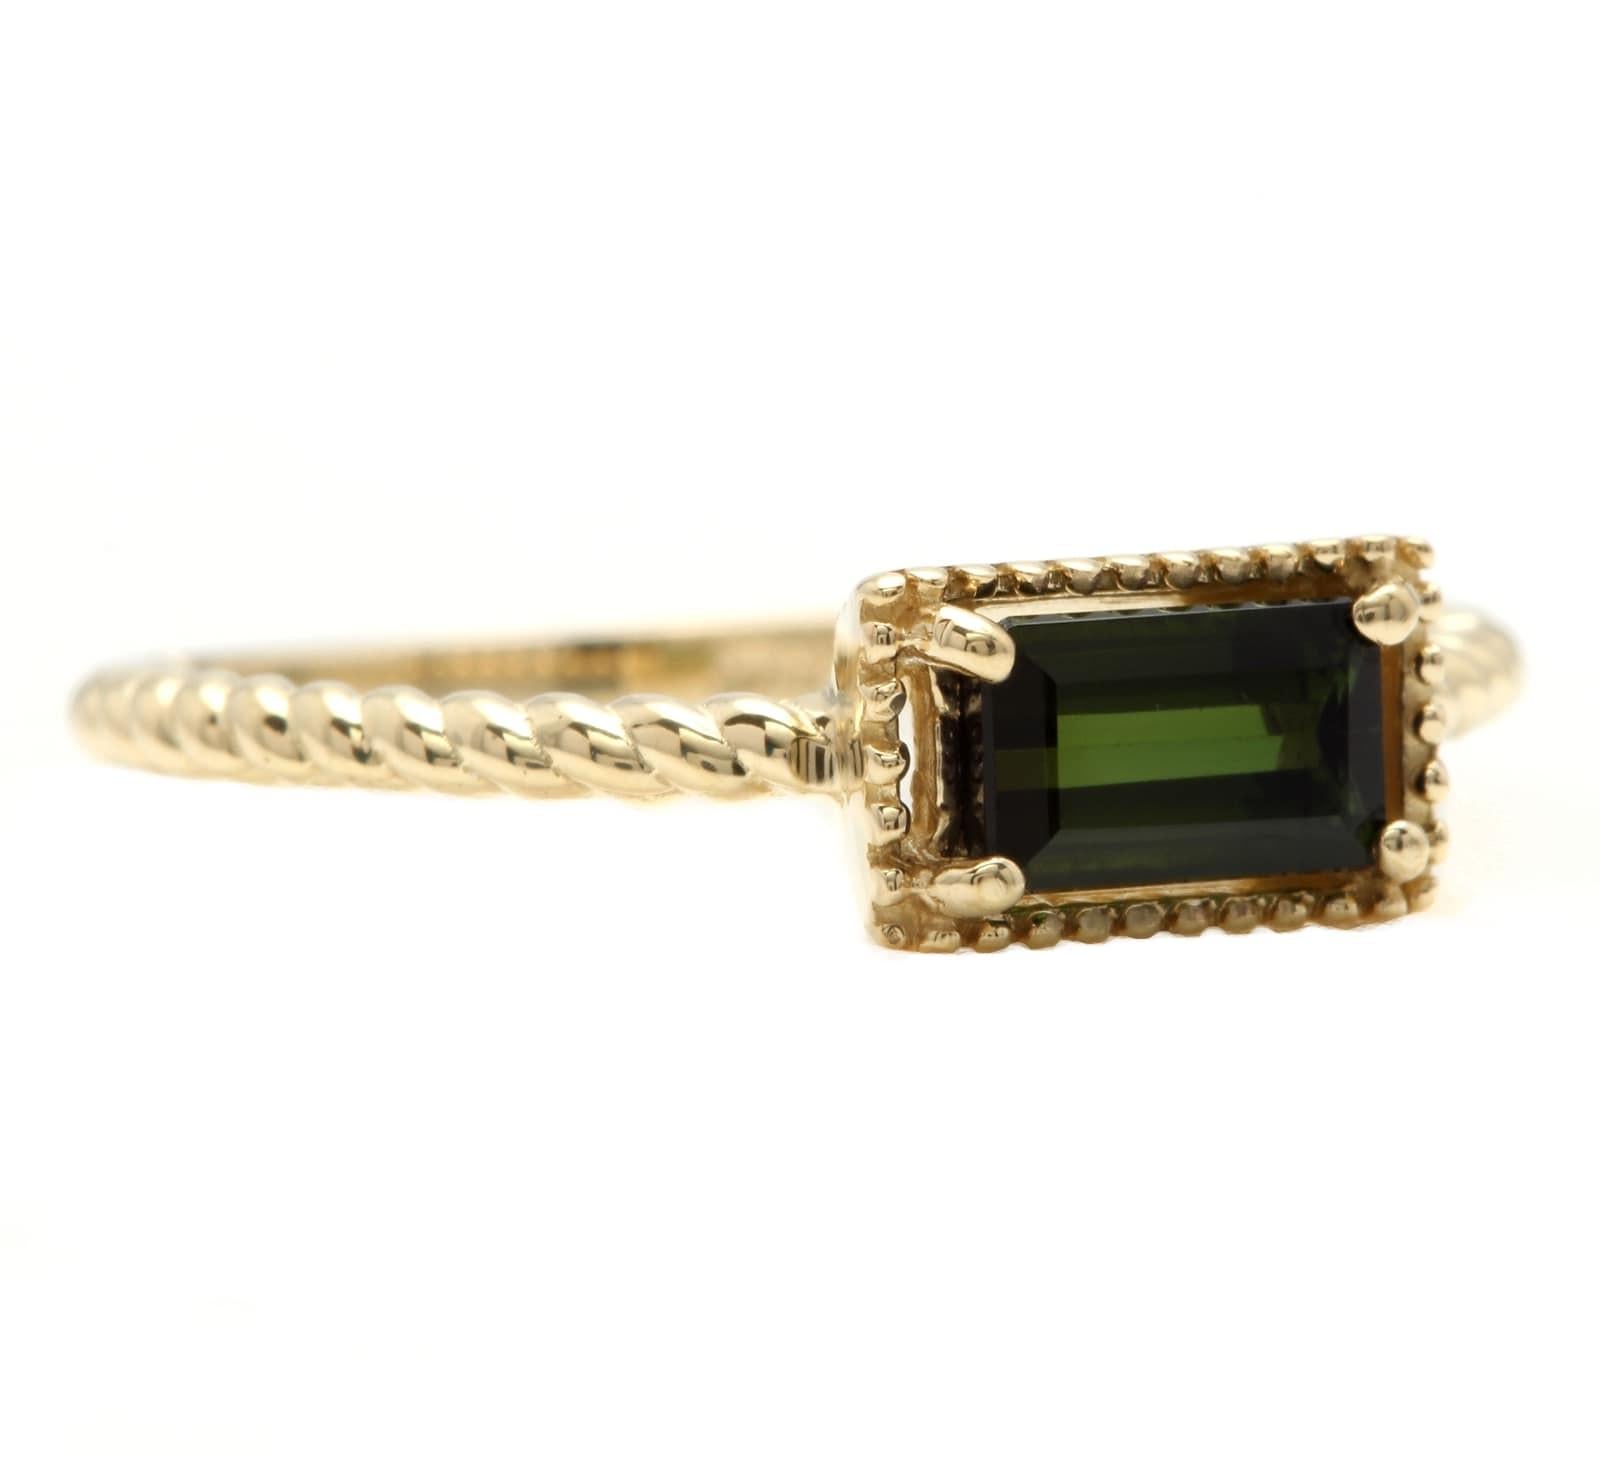 Exquisite Natural Green Tourmaline 14K Solid Yellow Gold Ring

Total Natural Green Tourmaline Weight is: Approx. 0.60 Carats 

Tourmaline  Measures Approx.  6.00 x 3.70mm

Ring size: 6.75 (free re-sizing available)

Ring total weight: Approx. 1.6